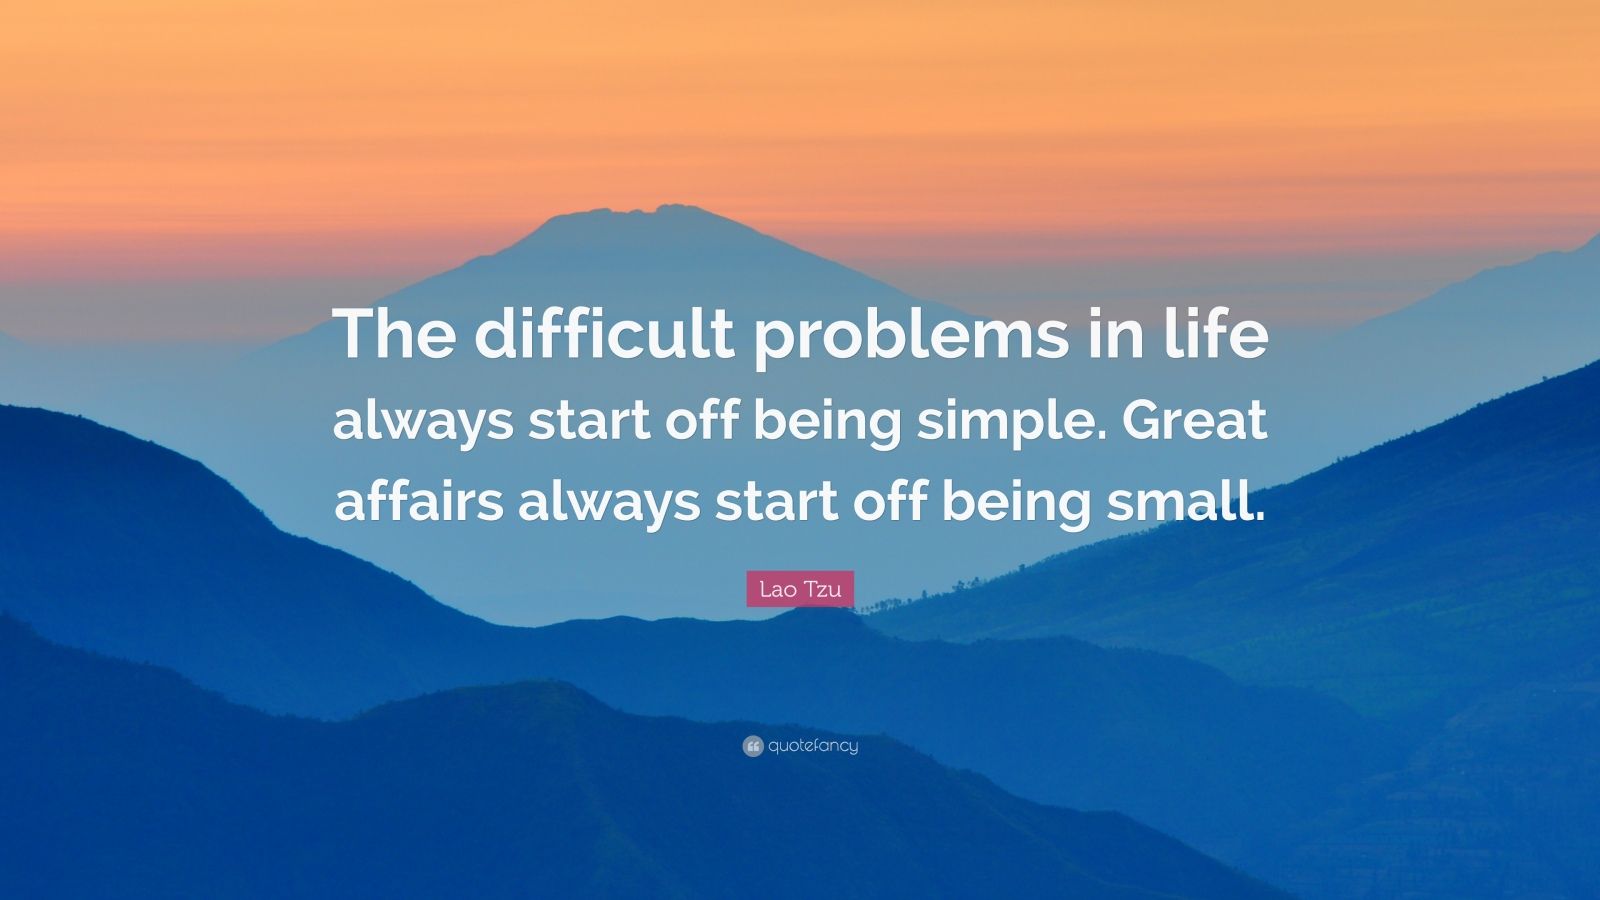 Lao Tzu Quote “The difficult problems in life always start off being simple